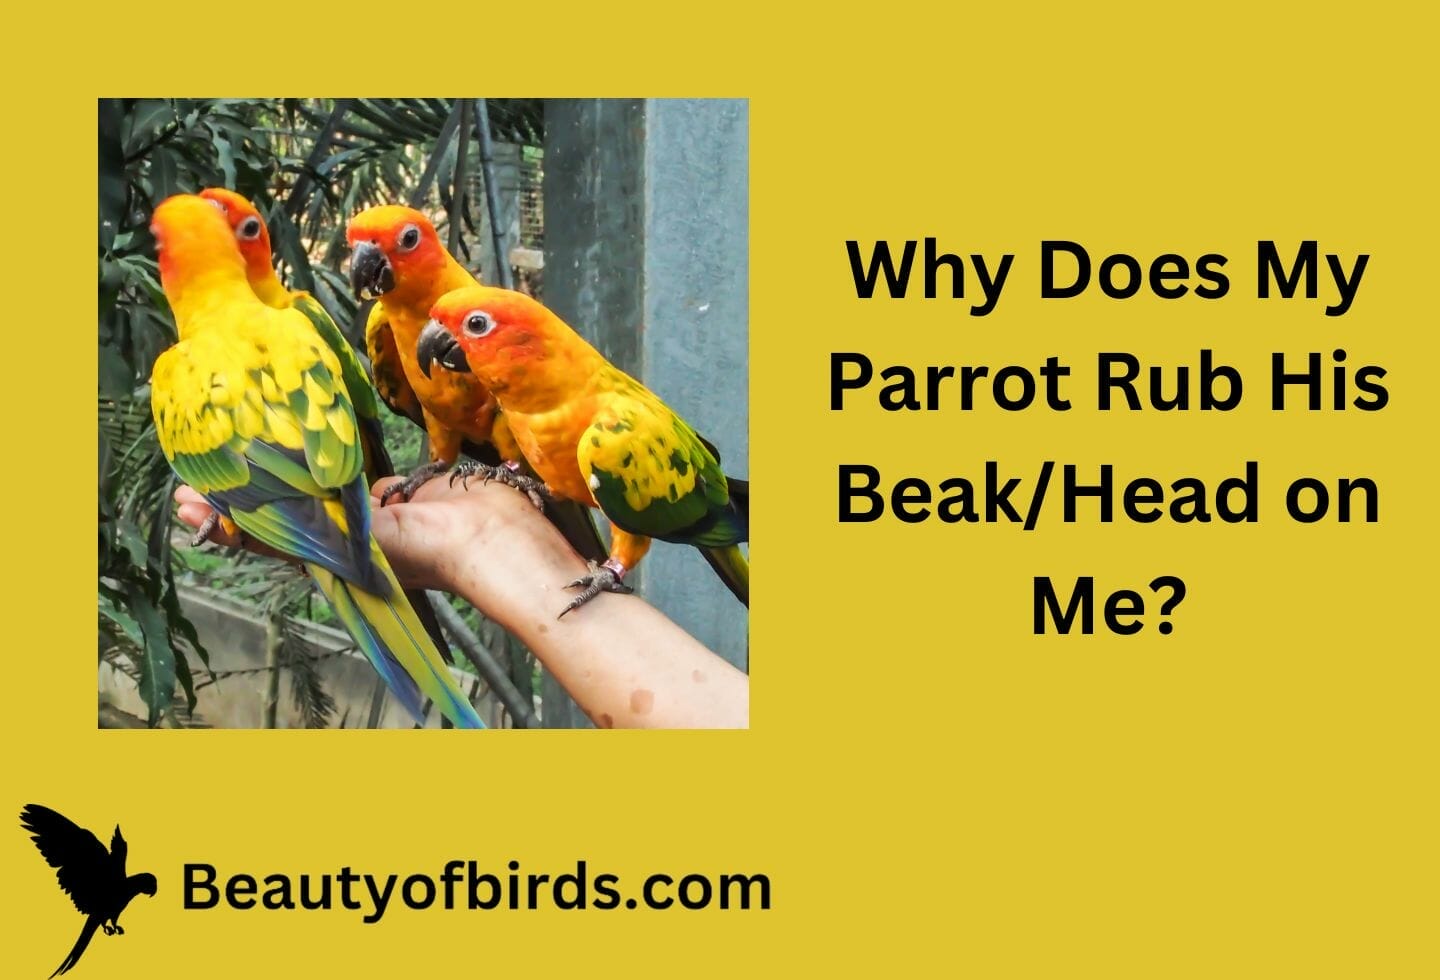 Why Does My Parrot Rub His Beak/Head on Me